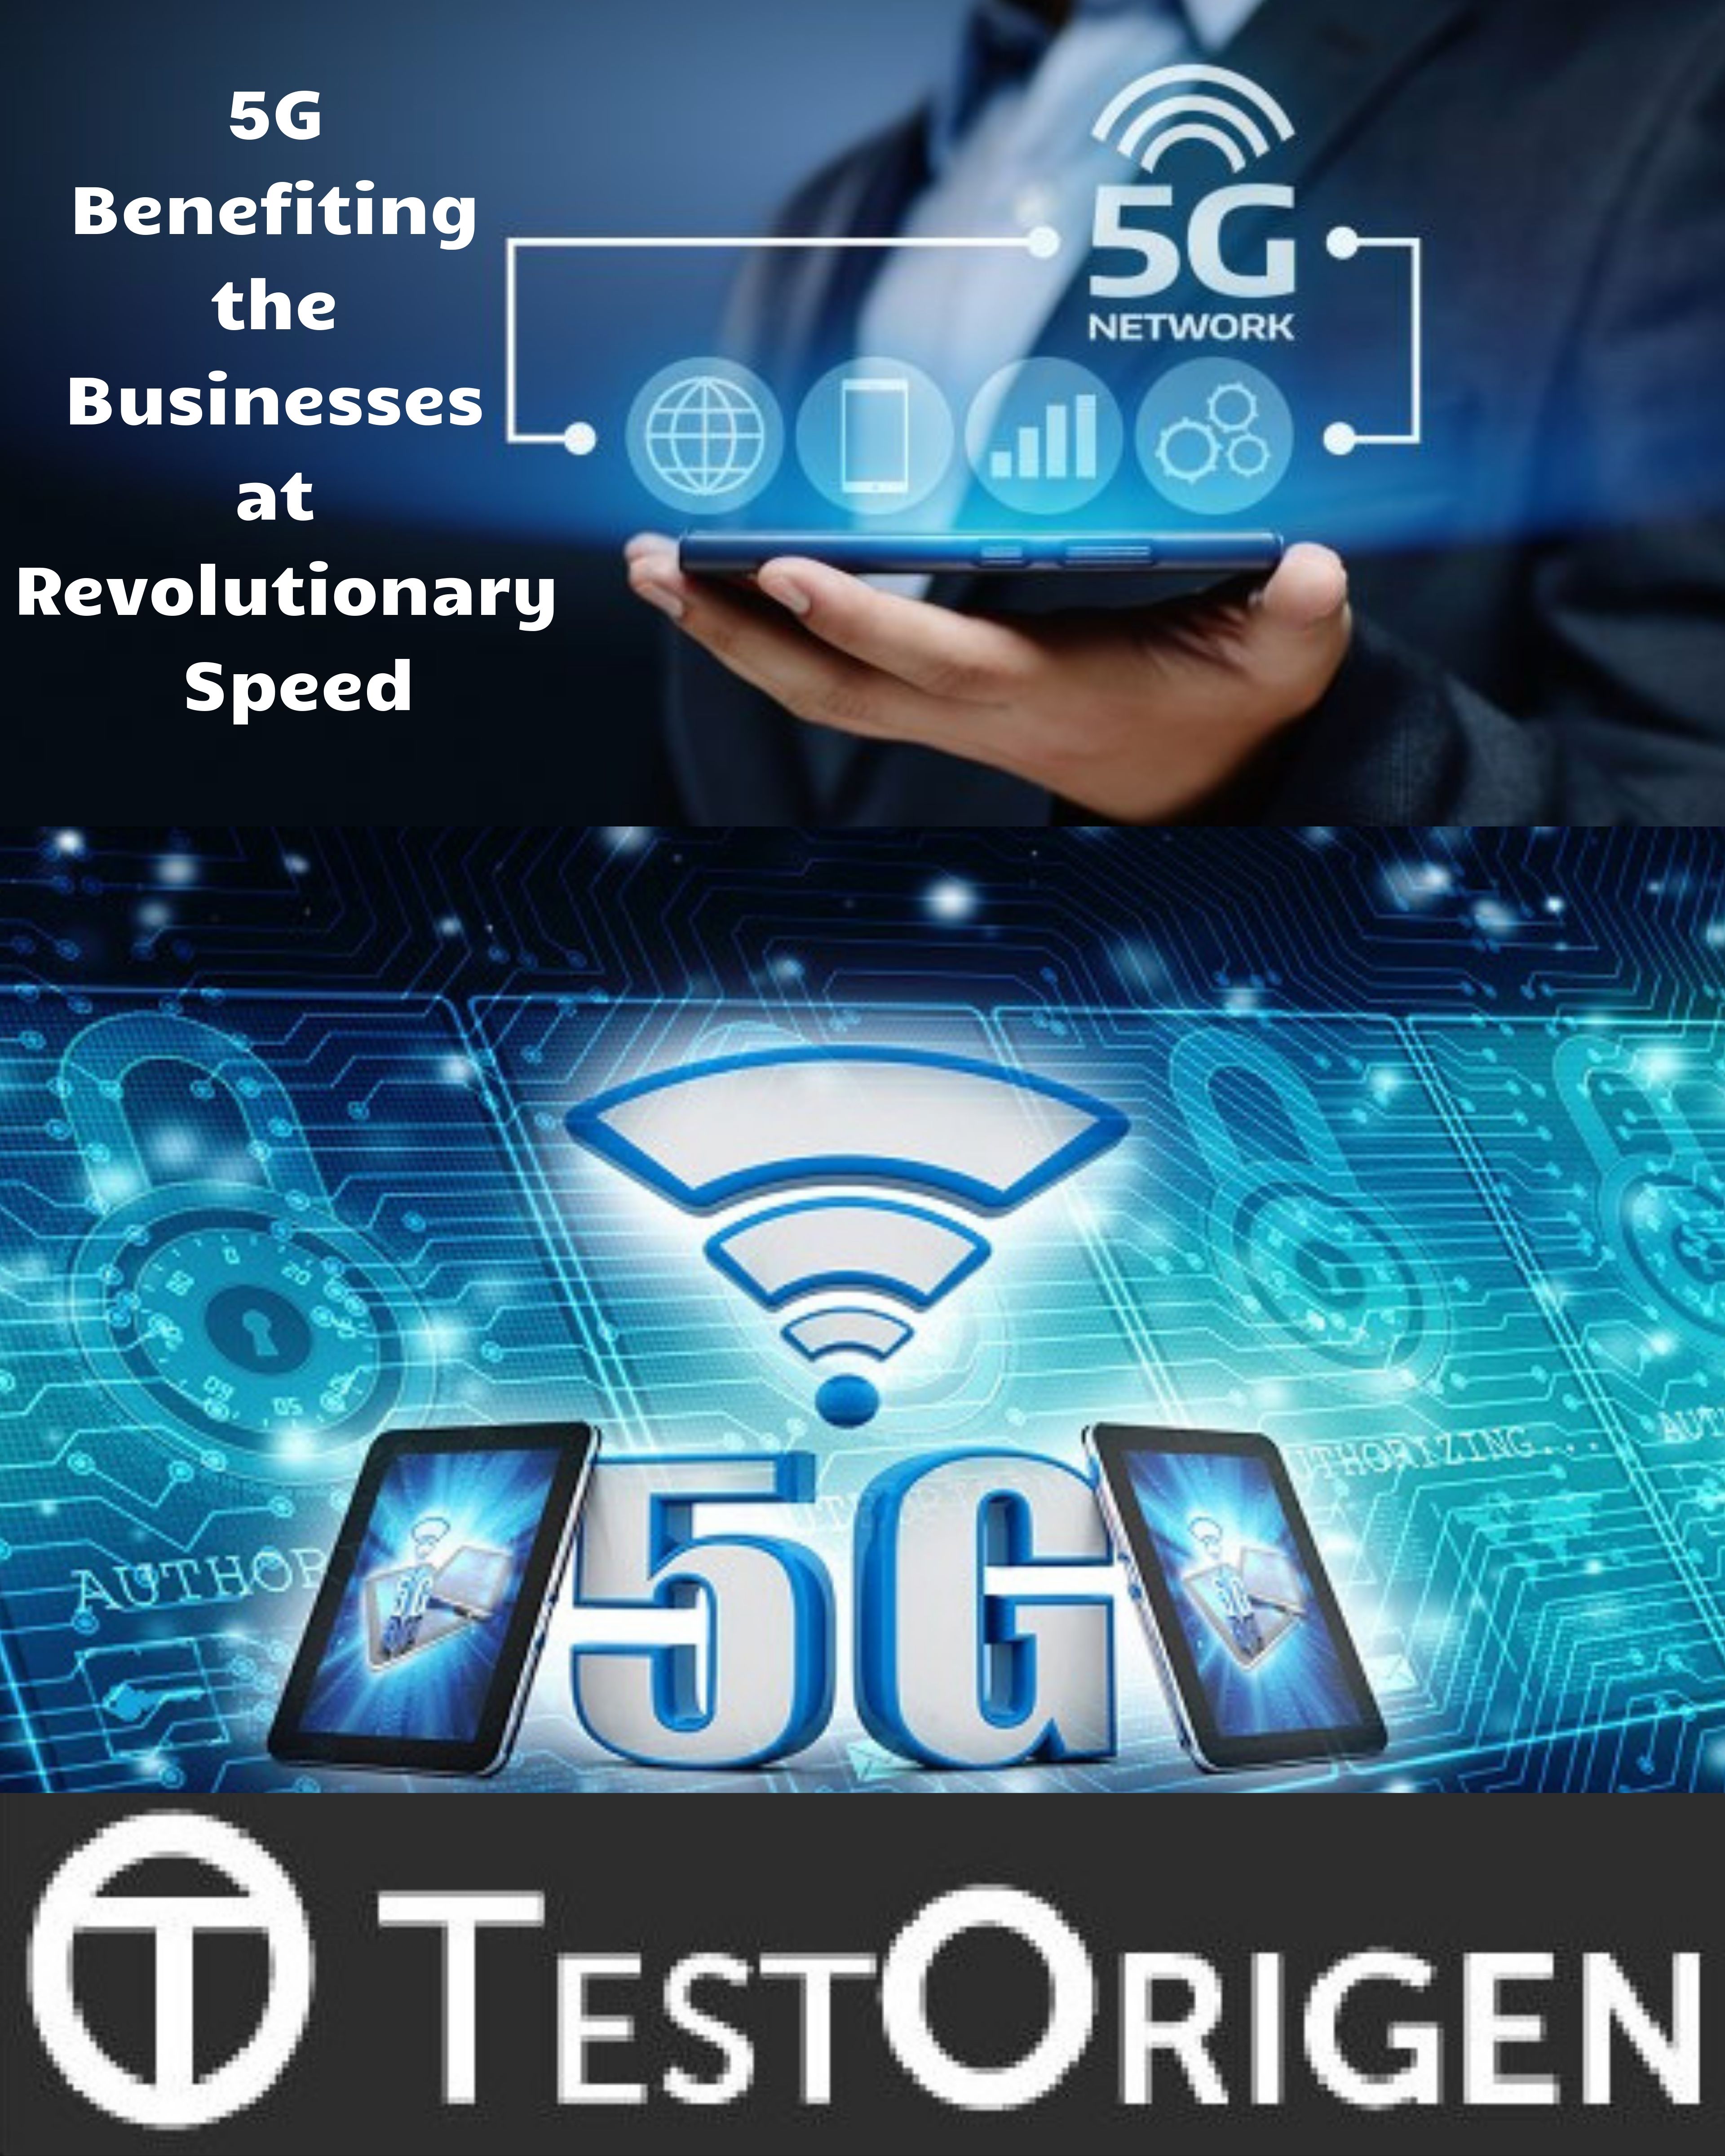 5G Benefiting the Businesses at Revolutionary Speed